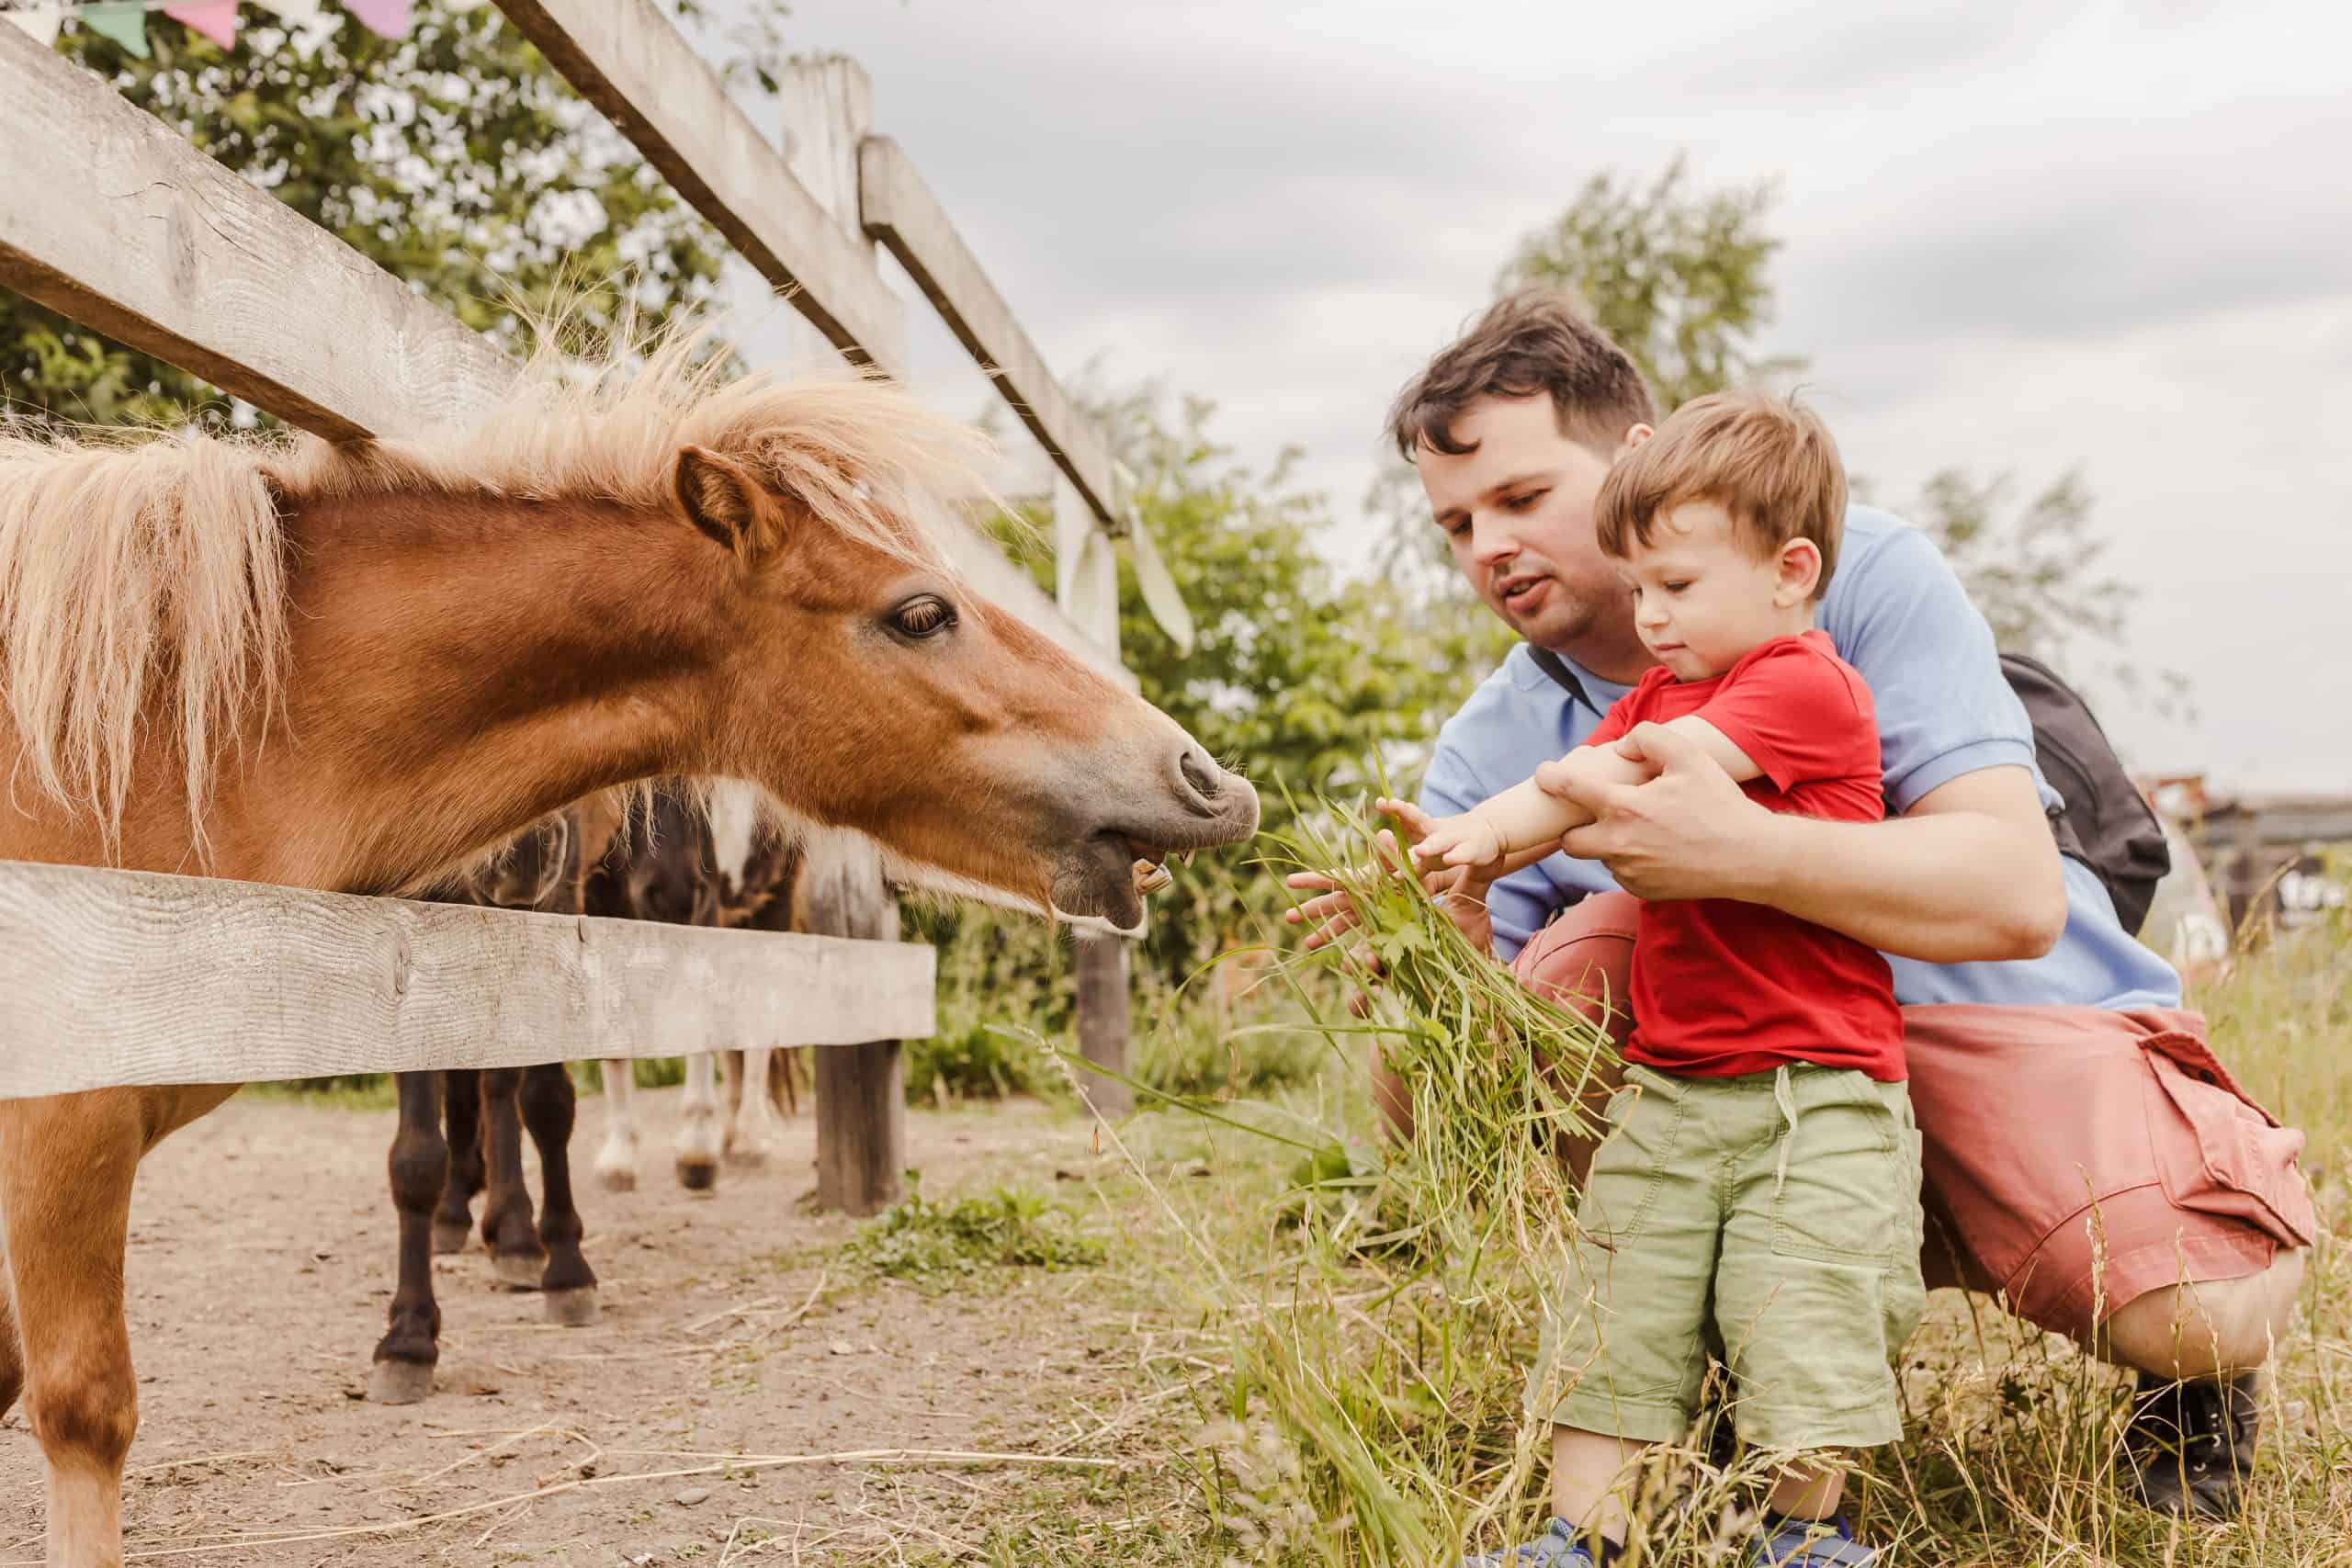 Toddler boy and his father feeding pony horse at animal farm. Outdoor fun for kids. Child feeds animal at pet zoo